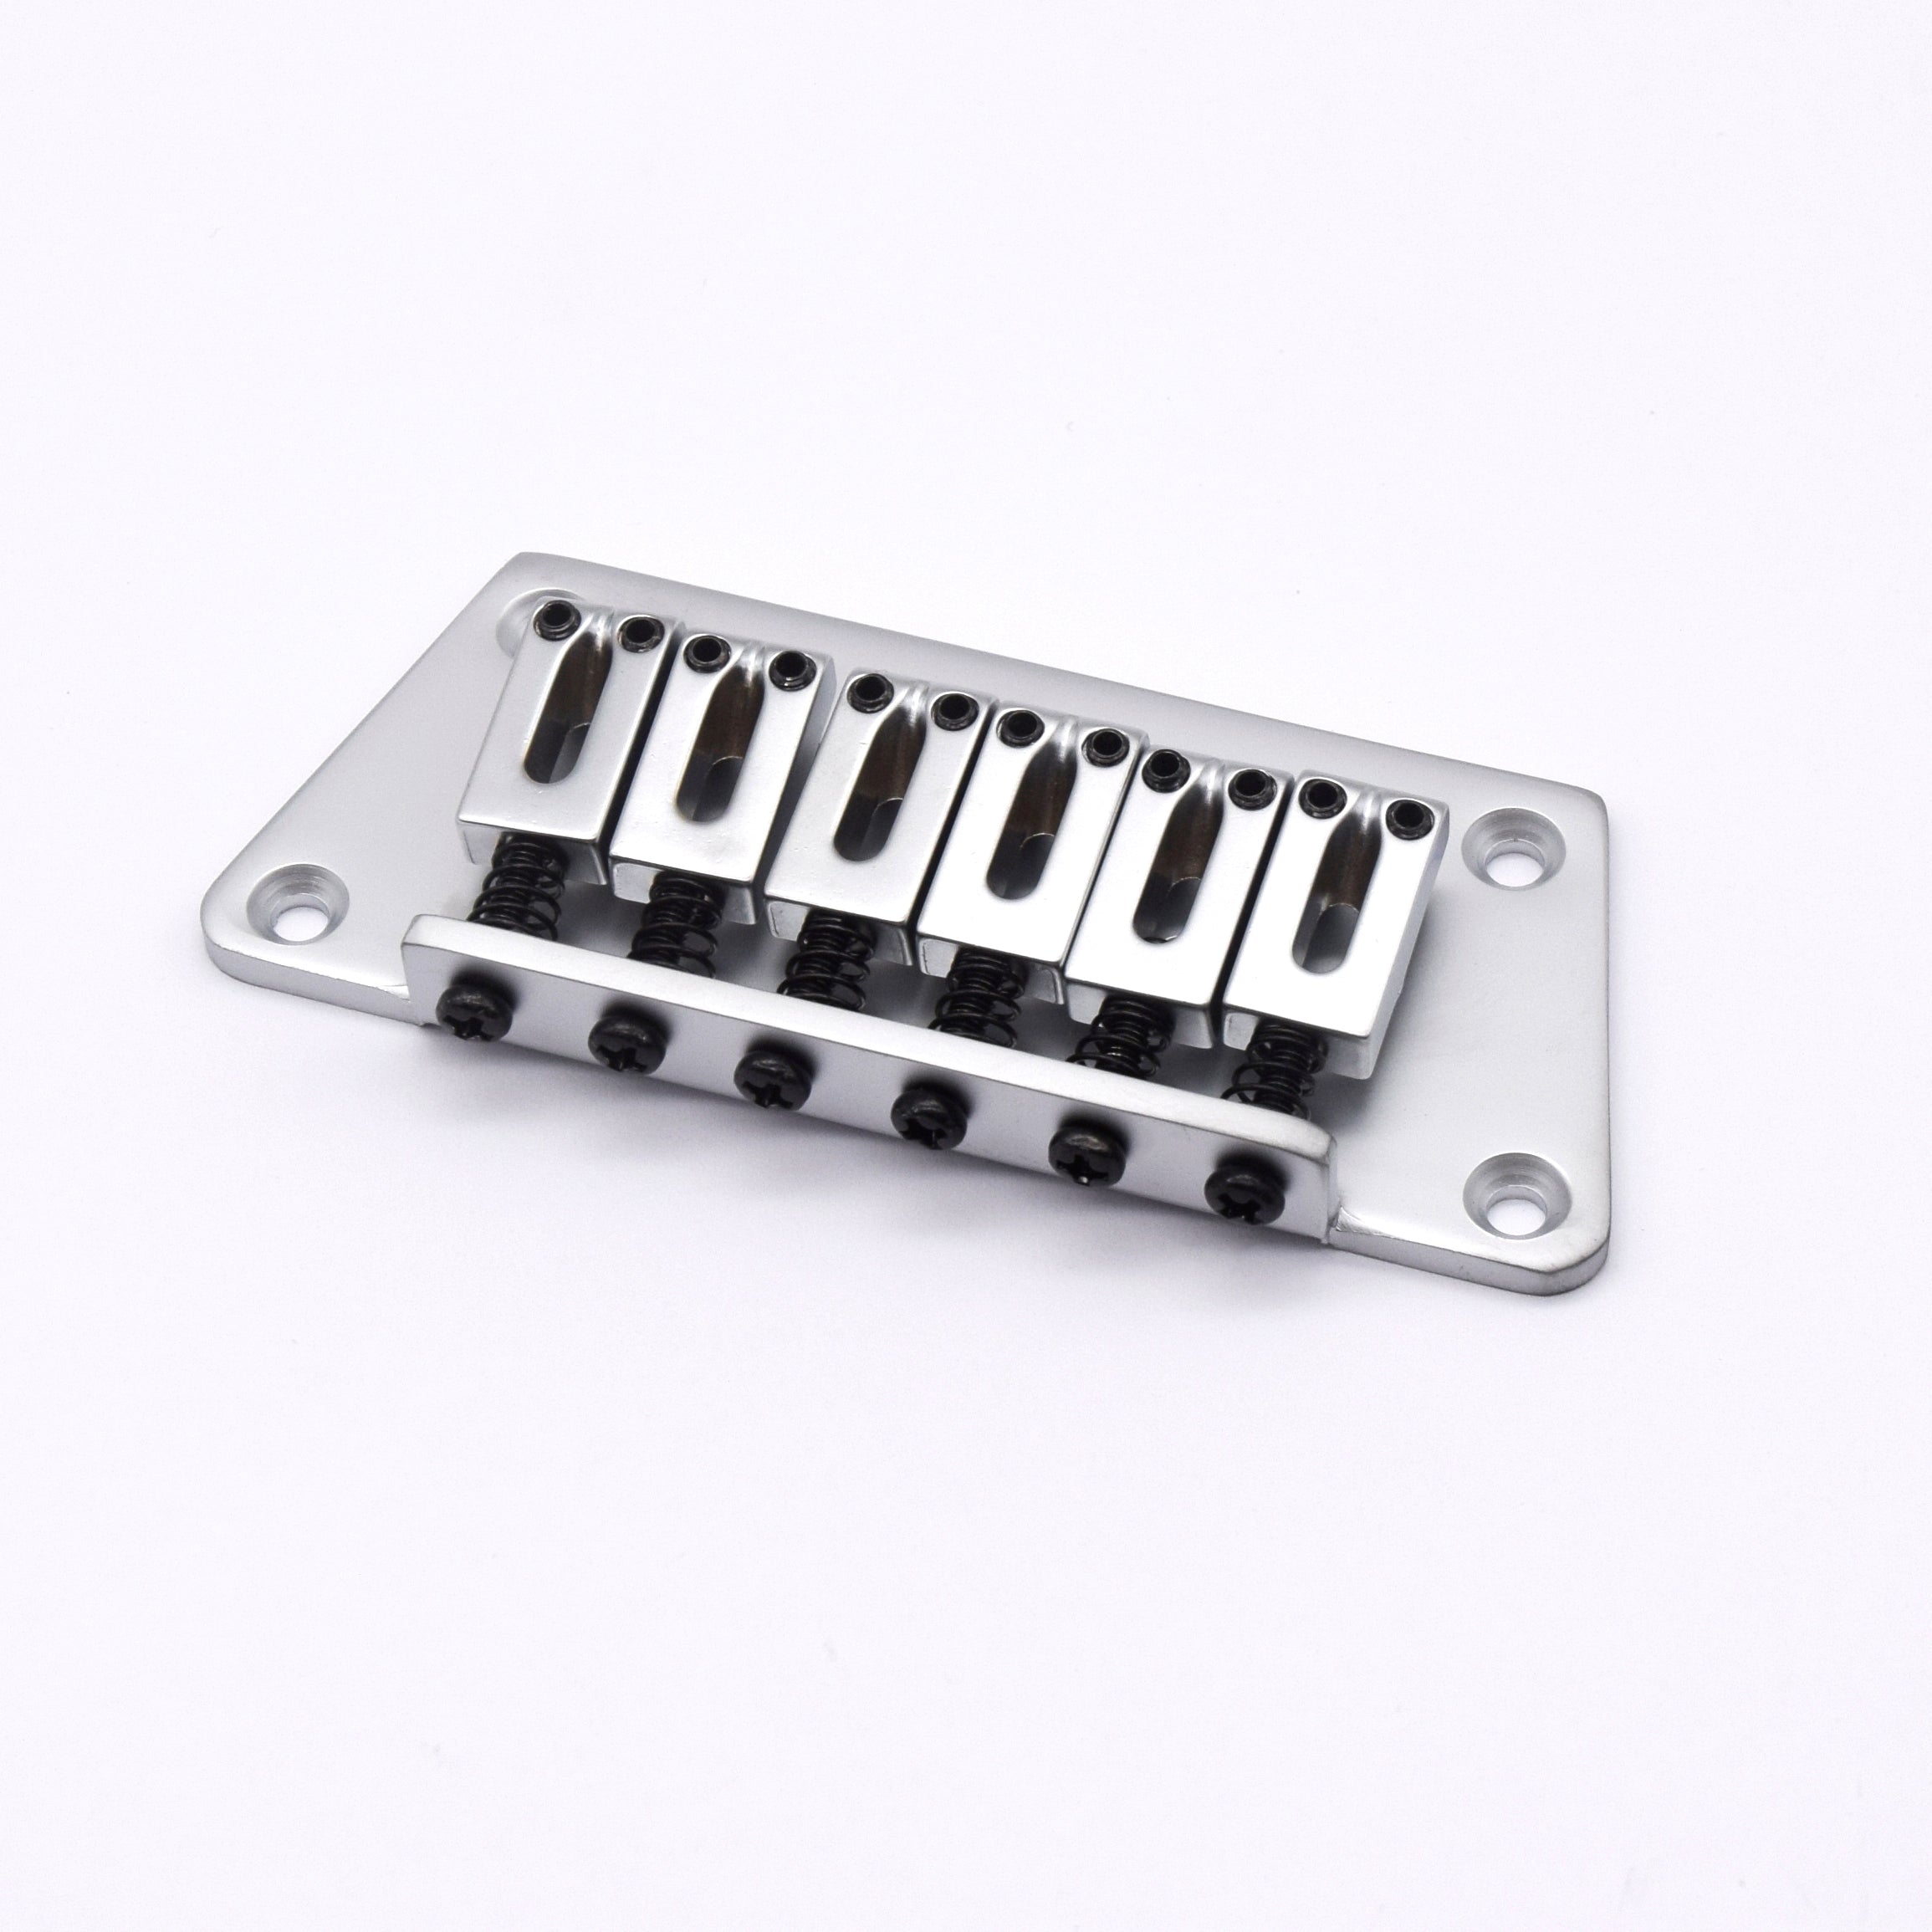 KD By AxLabs Surface Mount String-Through-Body Trapezoid Plate Bridge (Nighthawk-style) - AxLabs